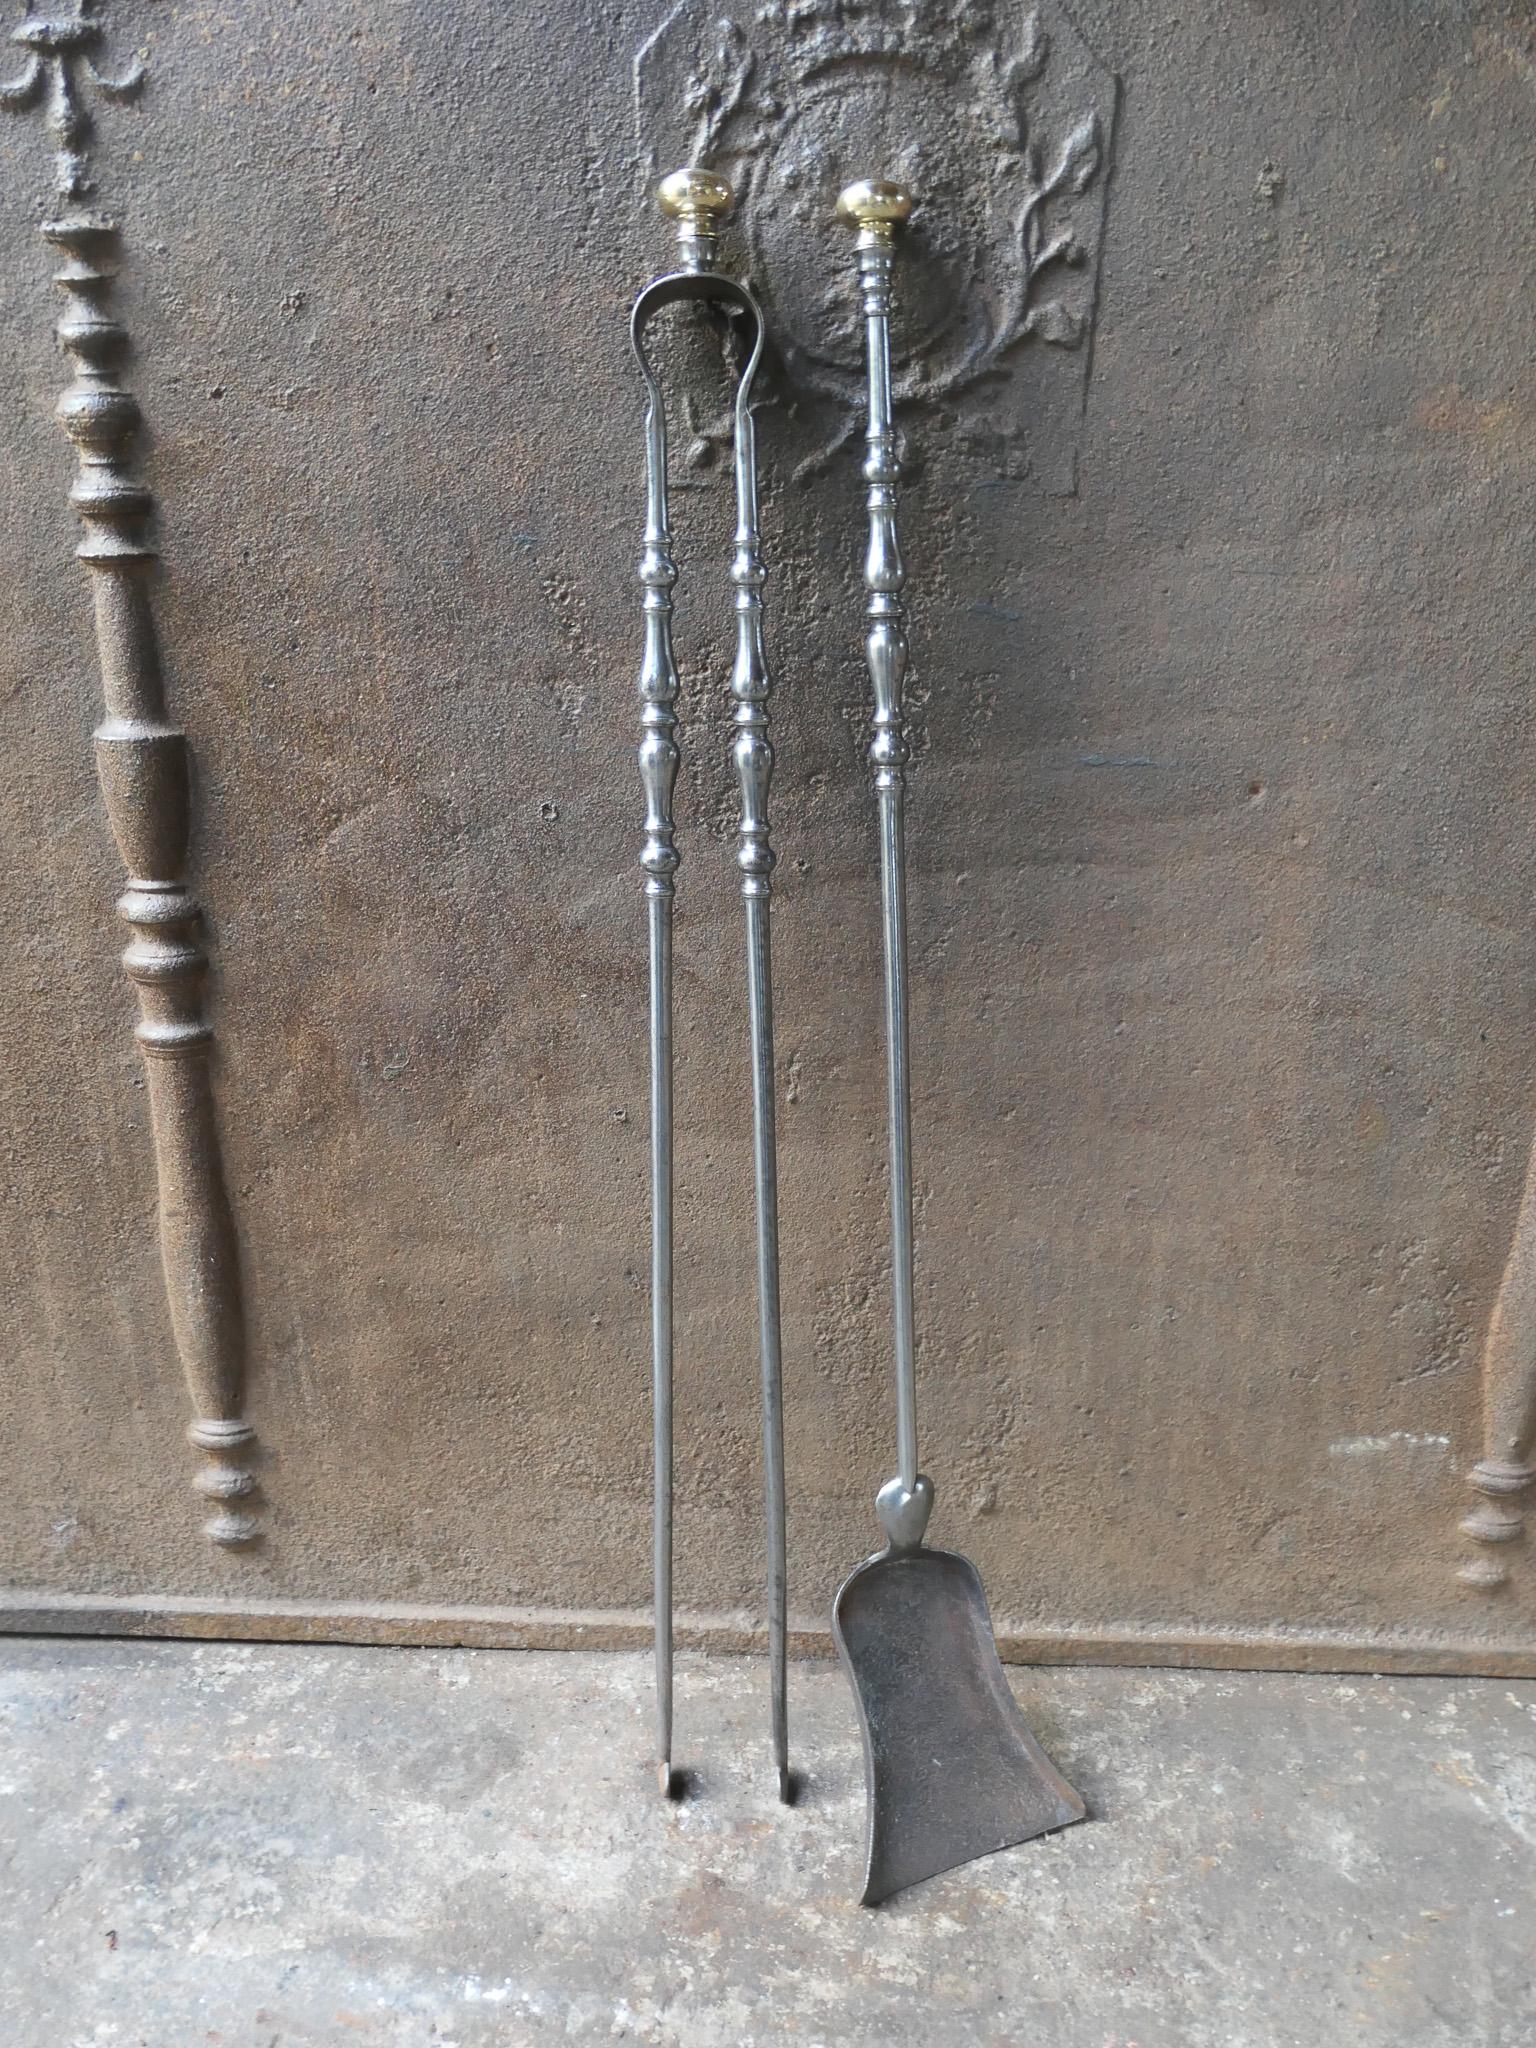 Large 19th century French Napoleon III period fireplace tool set. The tool set consists of tongs and shovel. The tools are made of wrought iron with brass handles. The set is in a good condition and fit for use in the fireplace.